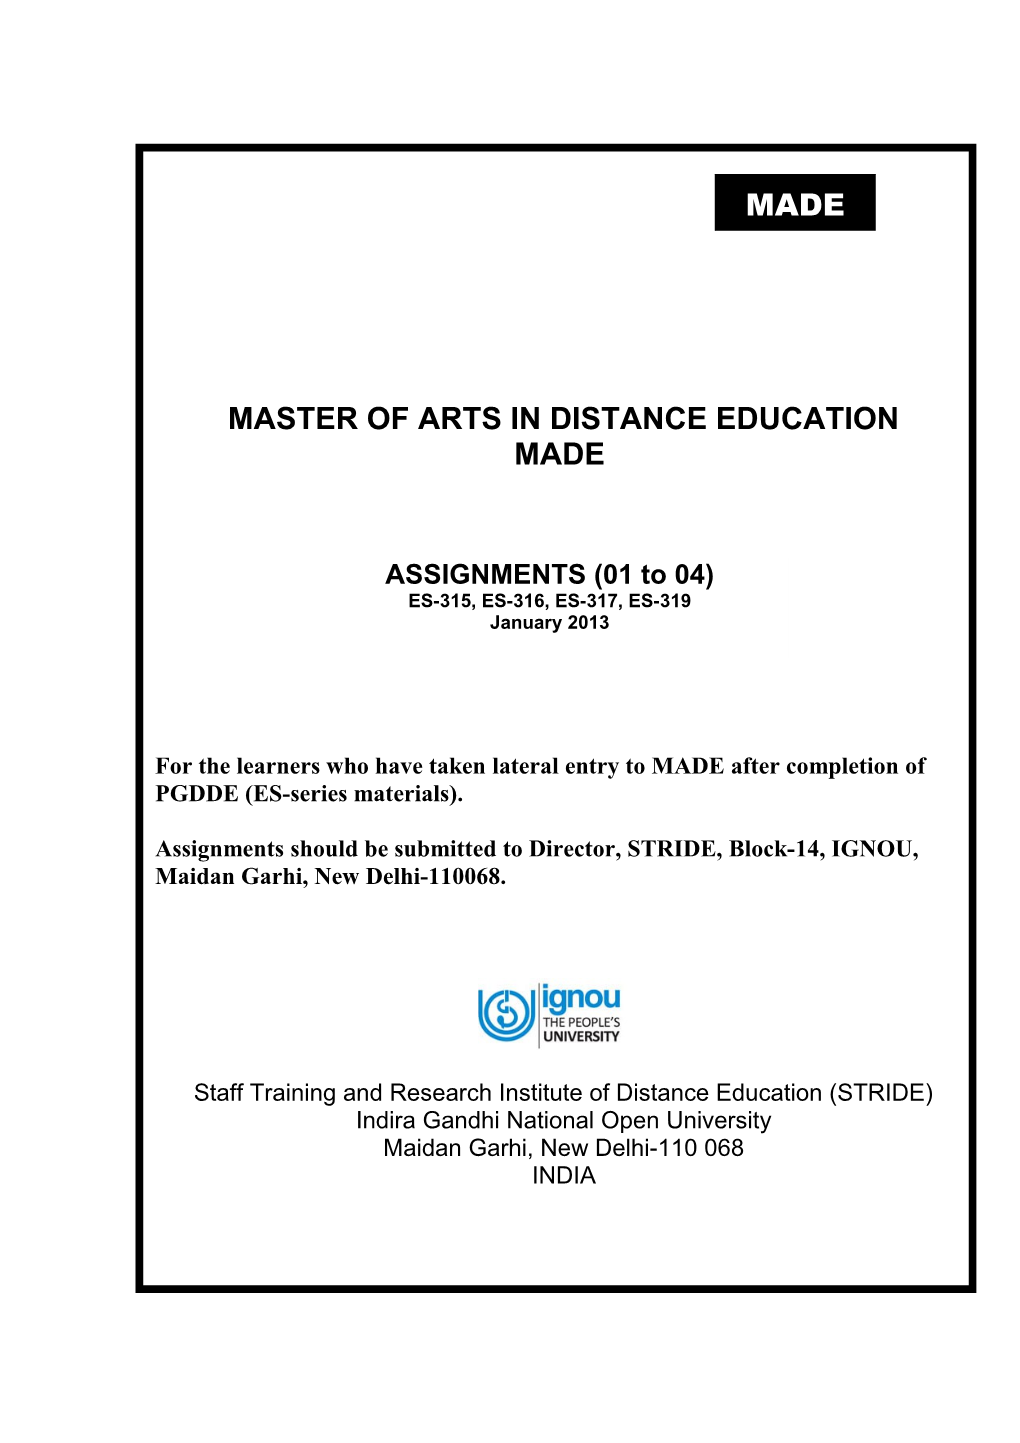 Master of Arts in Distance Education